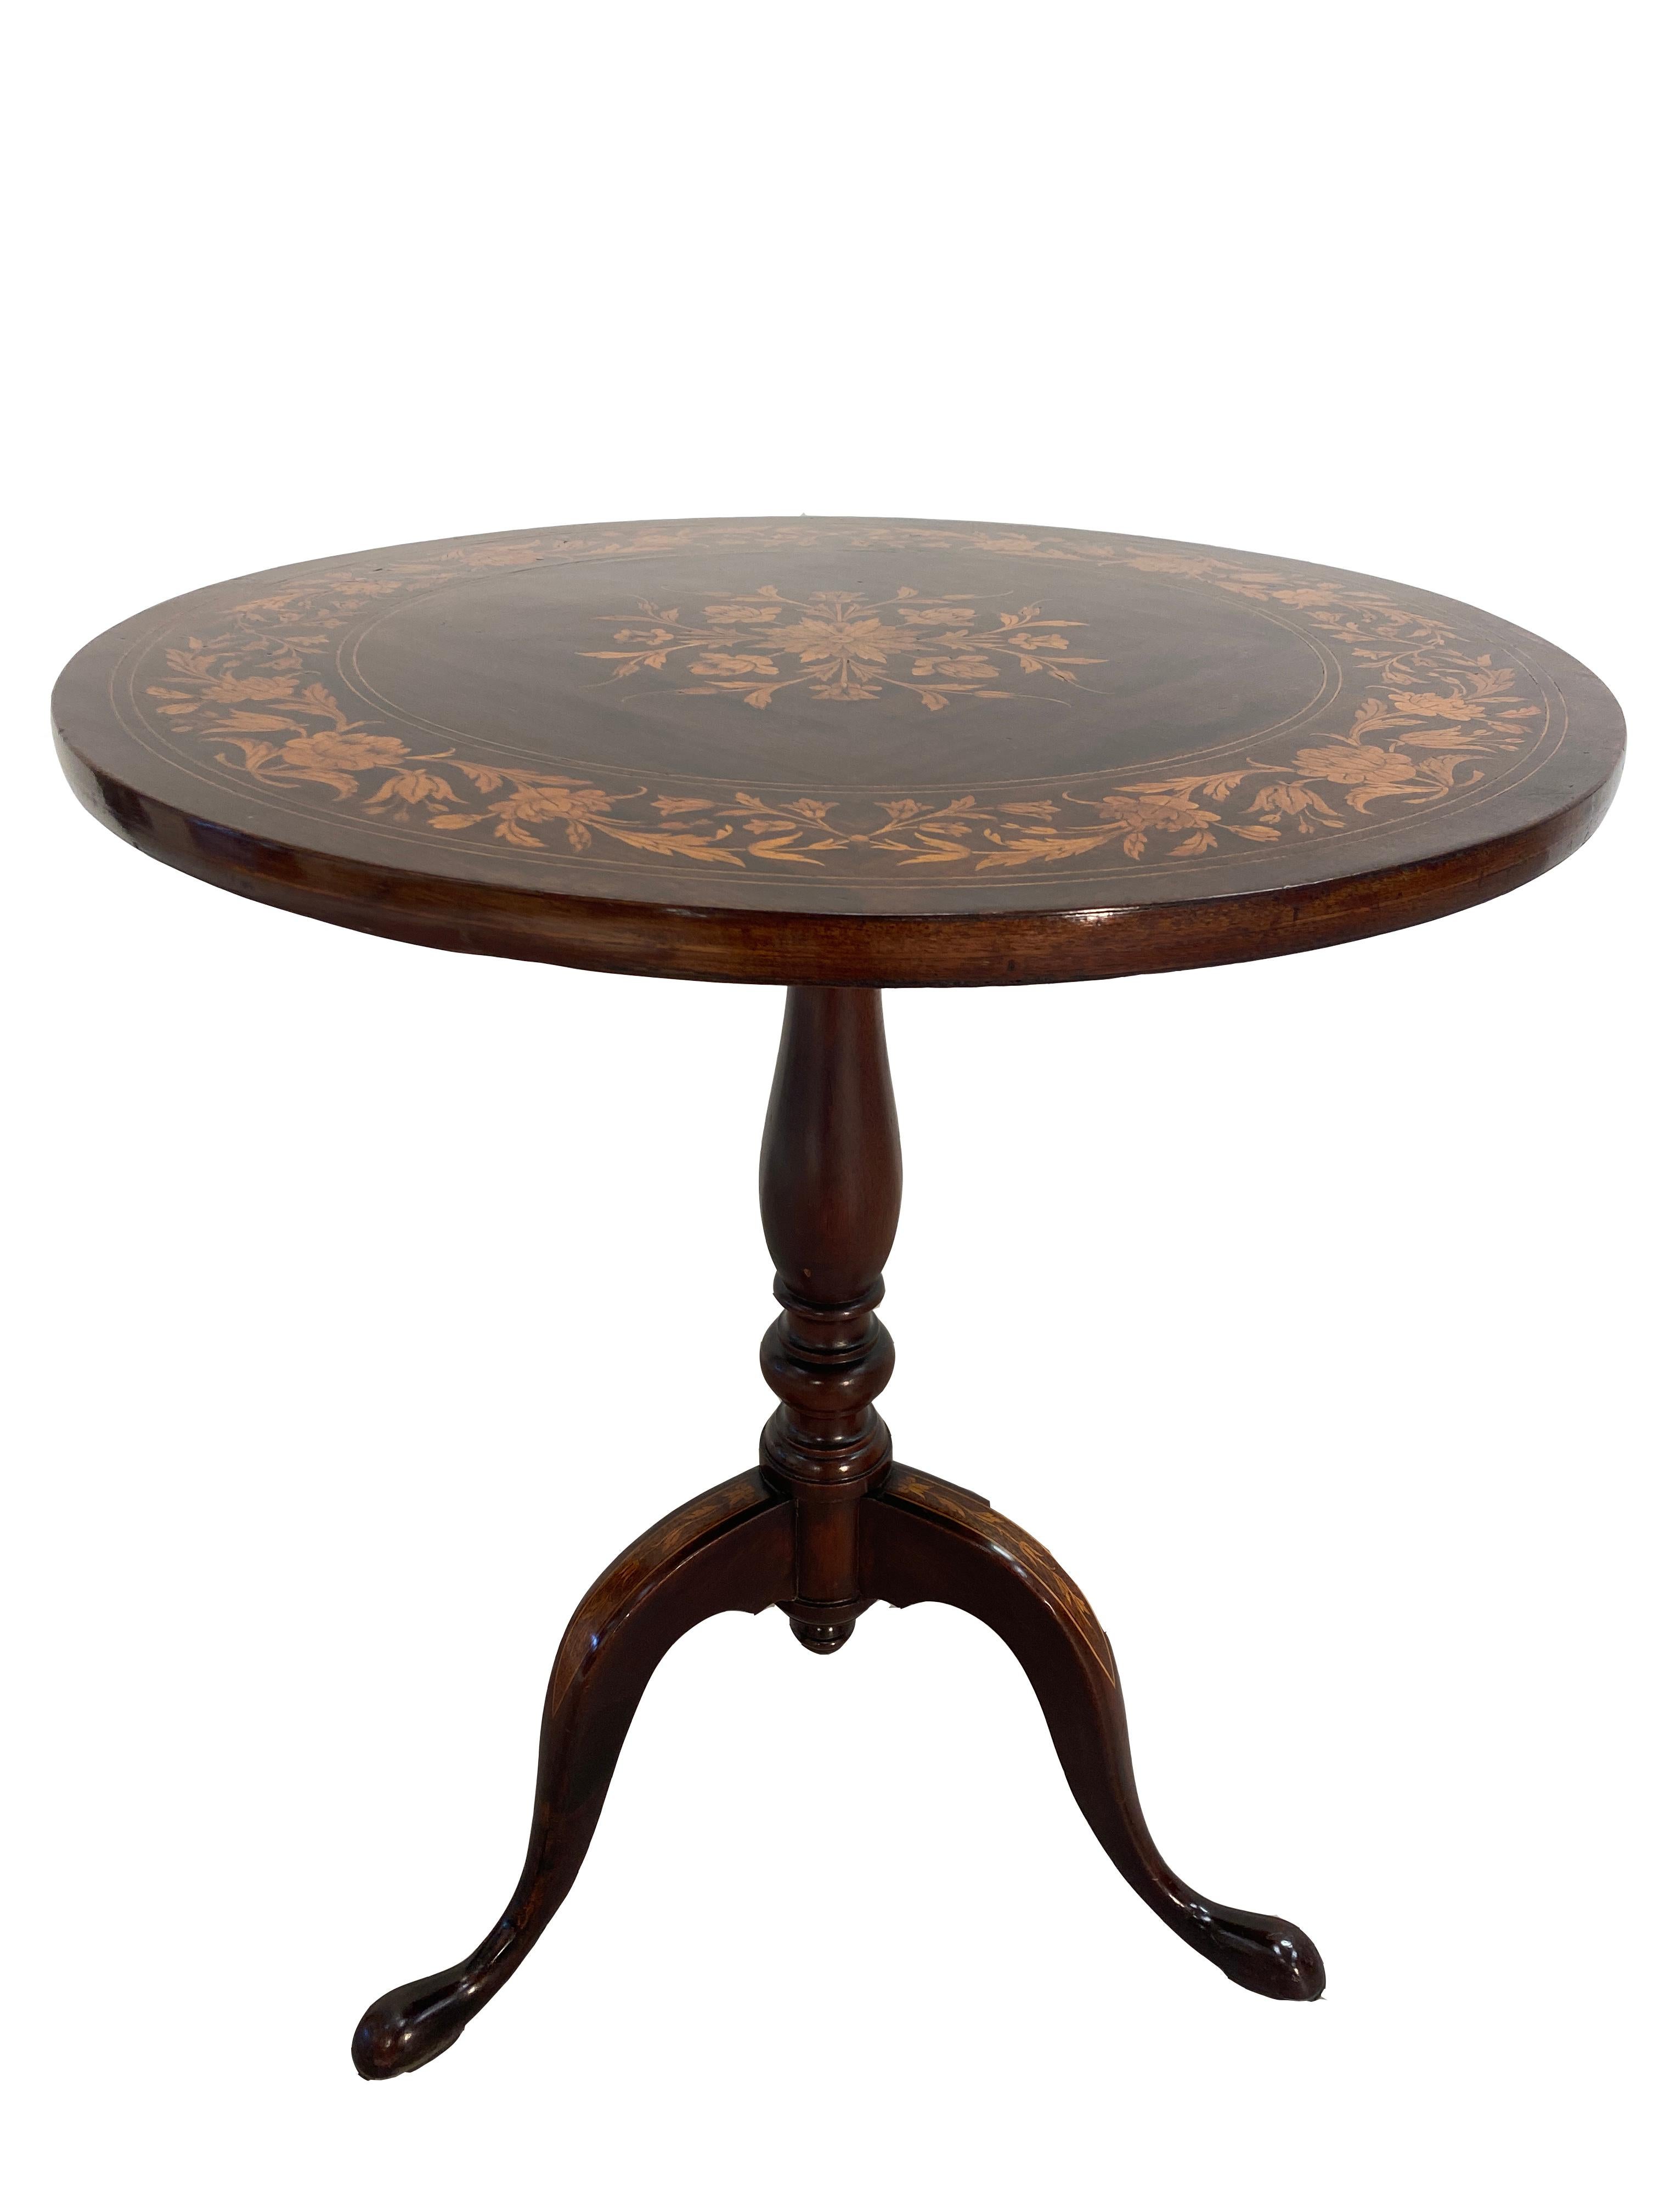 This is a very good condition Mahogany English Regency tilt top teat table with Marquetry inlay. The round table is attached to a three legged stand. The top and legs are adorned with Marquetry inlay. The finish is highly polished. The top is stable